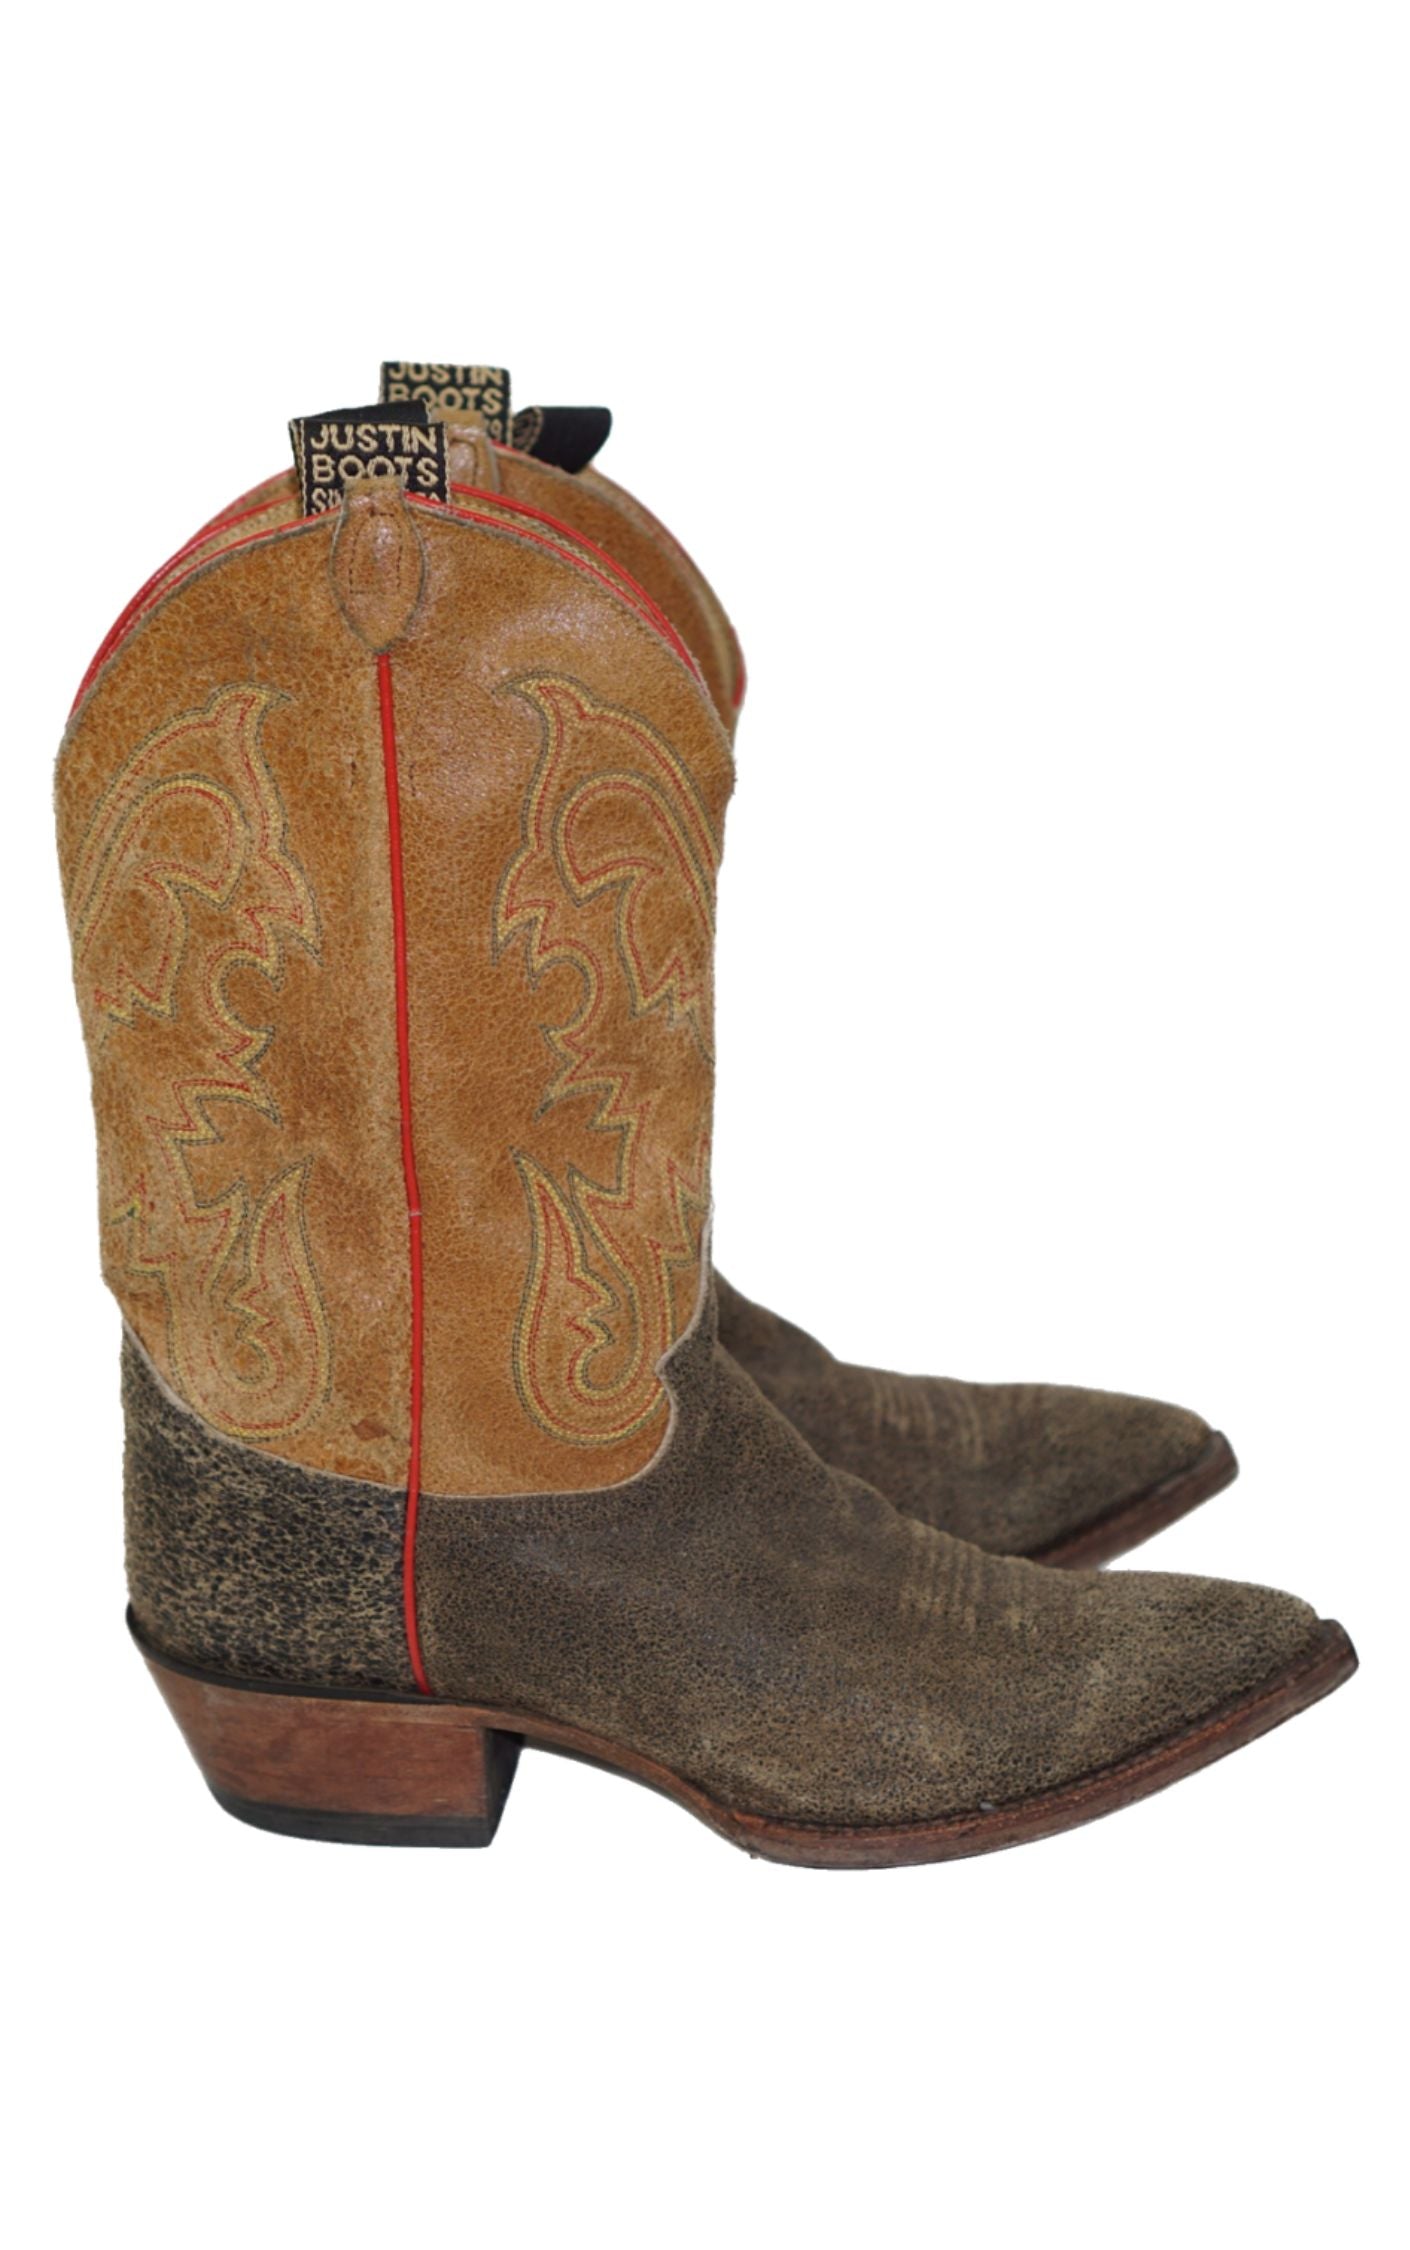 VINTAGE Faded Leather Western Cowboy Boots resellum